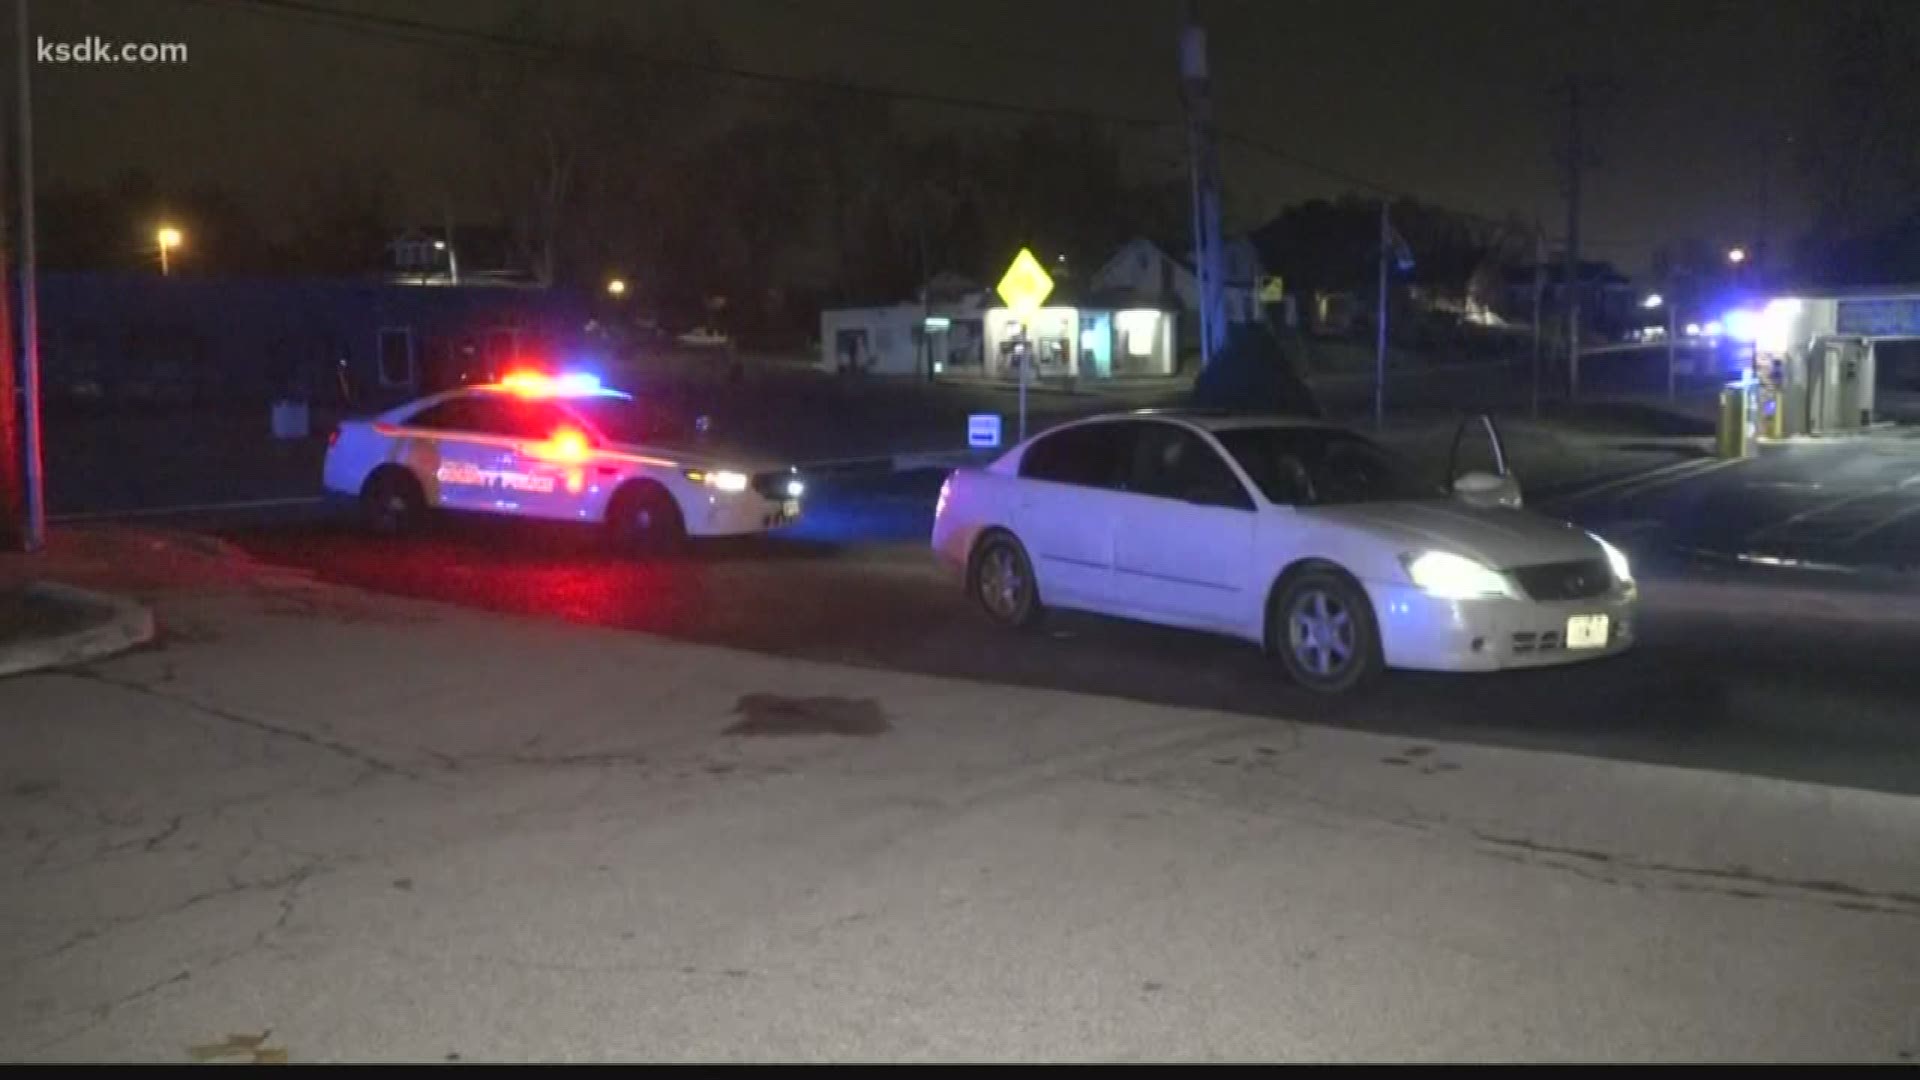 The shooting happened at around 1 a.m. near Hanley and St. Charles Rock Road.